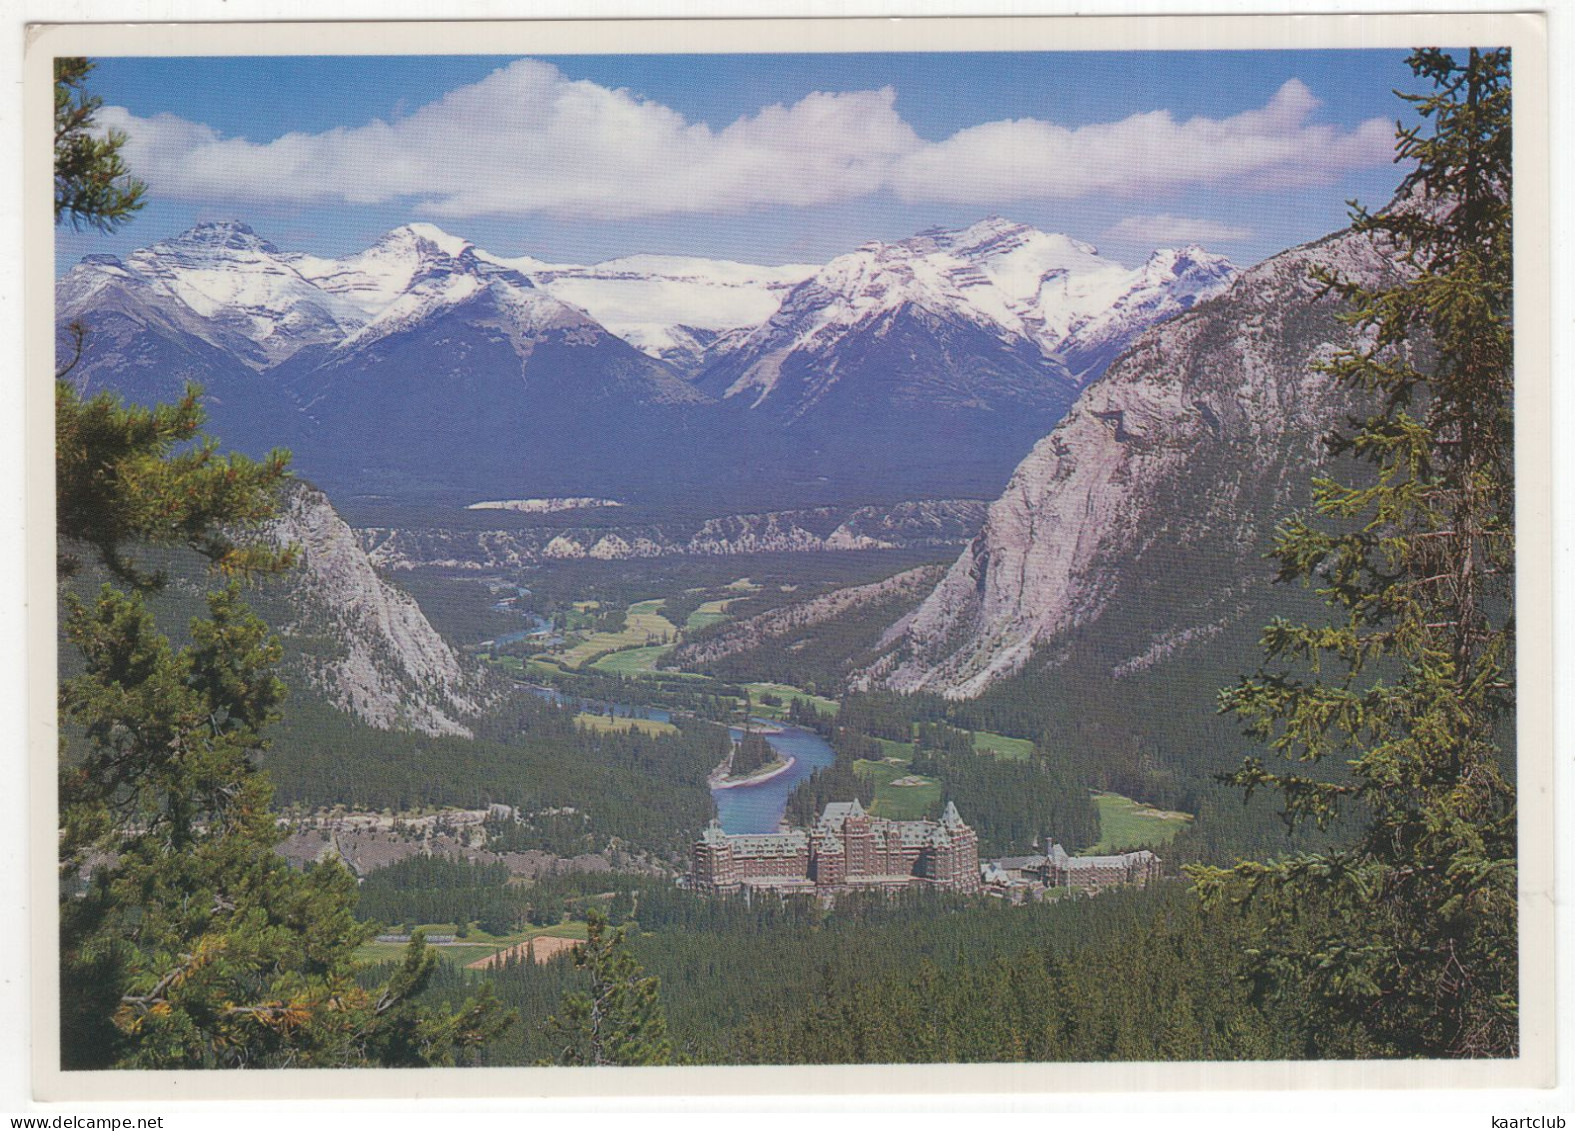 The Banff Springs Hotel And The Bow Valley - Banff National Park, The Canadian Rockies - Banff